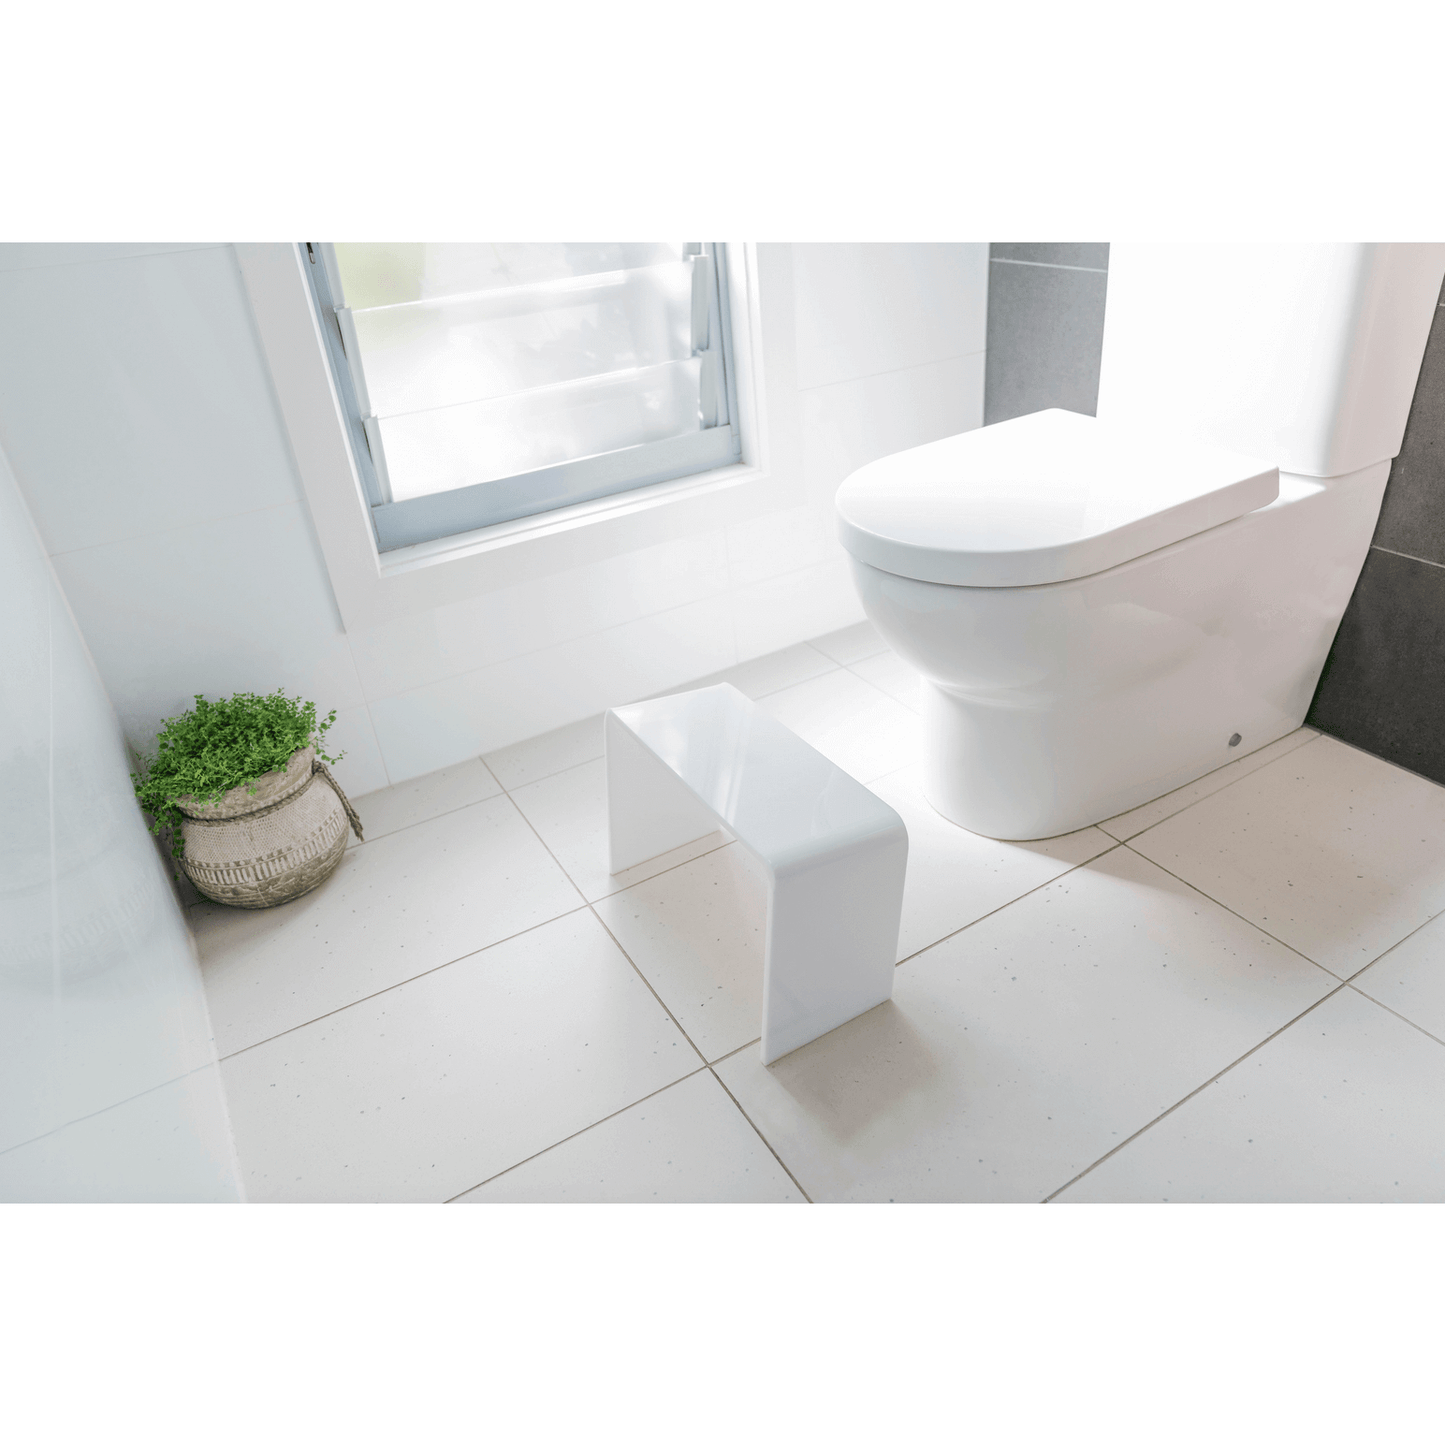 The PROPPR Acer - White Toilet Foot Stool - top angled view in a bathroom